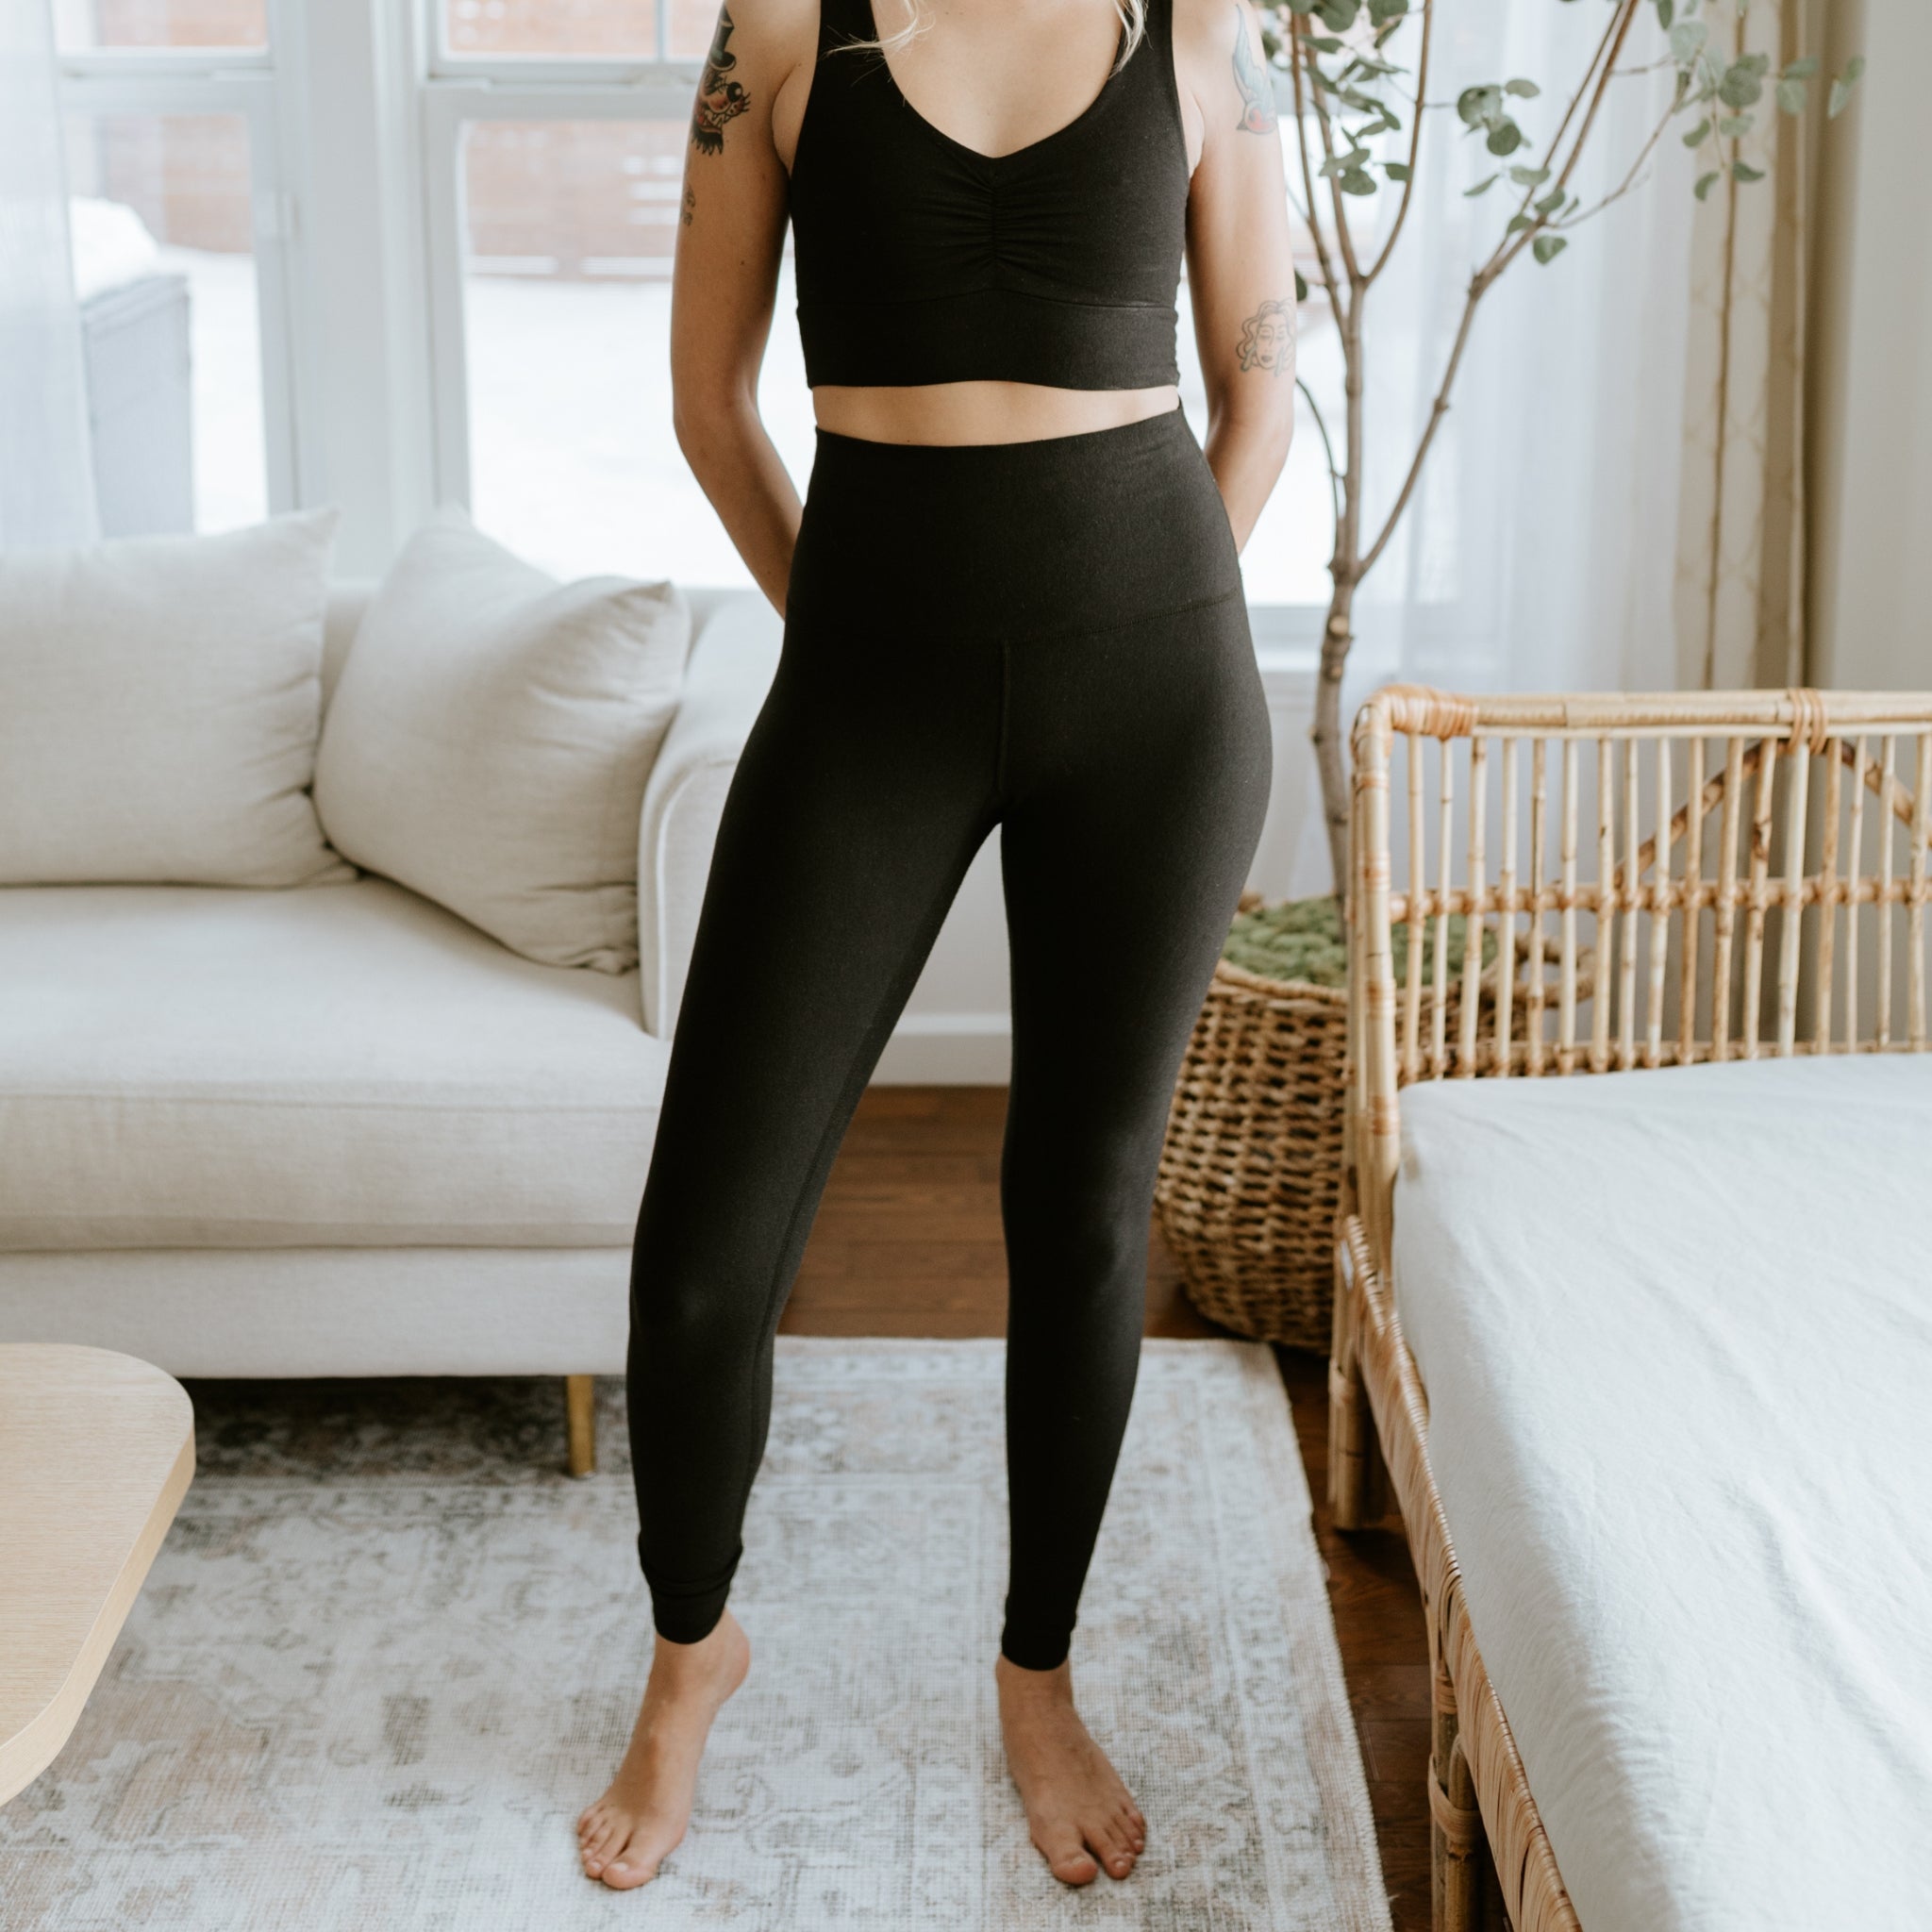 Our best seller ribbed fleece leggings are back in stock, and in